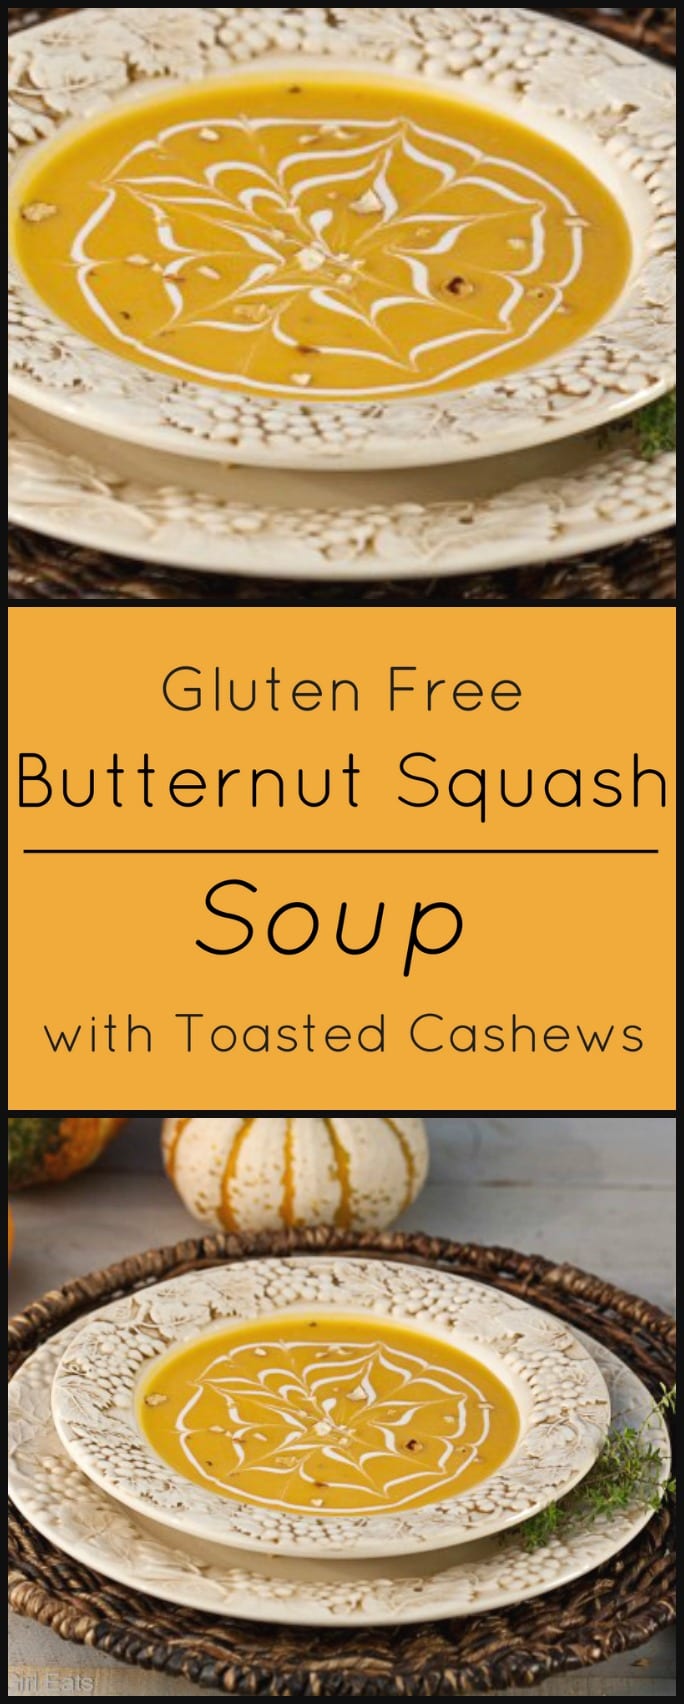 Gluten free Butternut Squash Soup with Toasted Cashews.